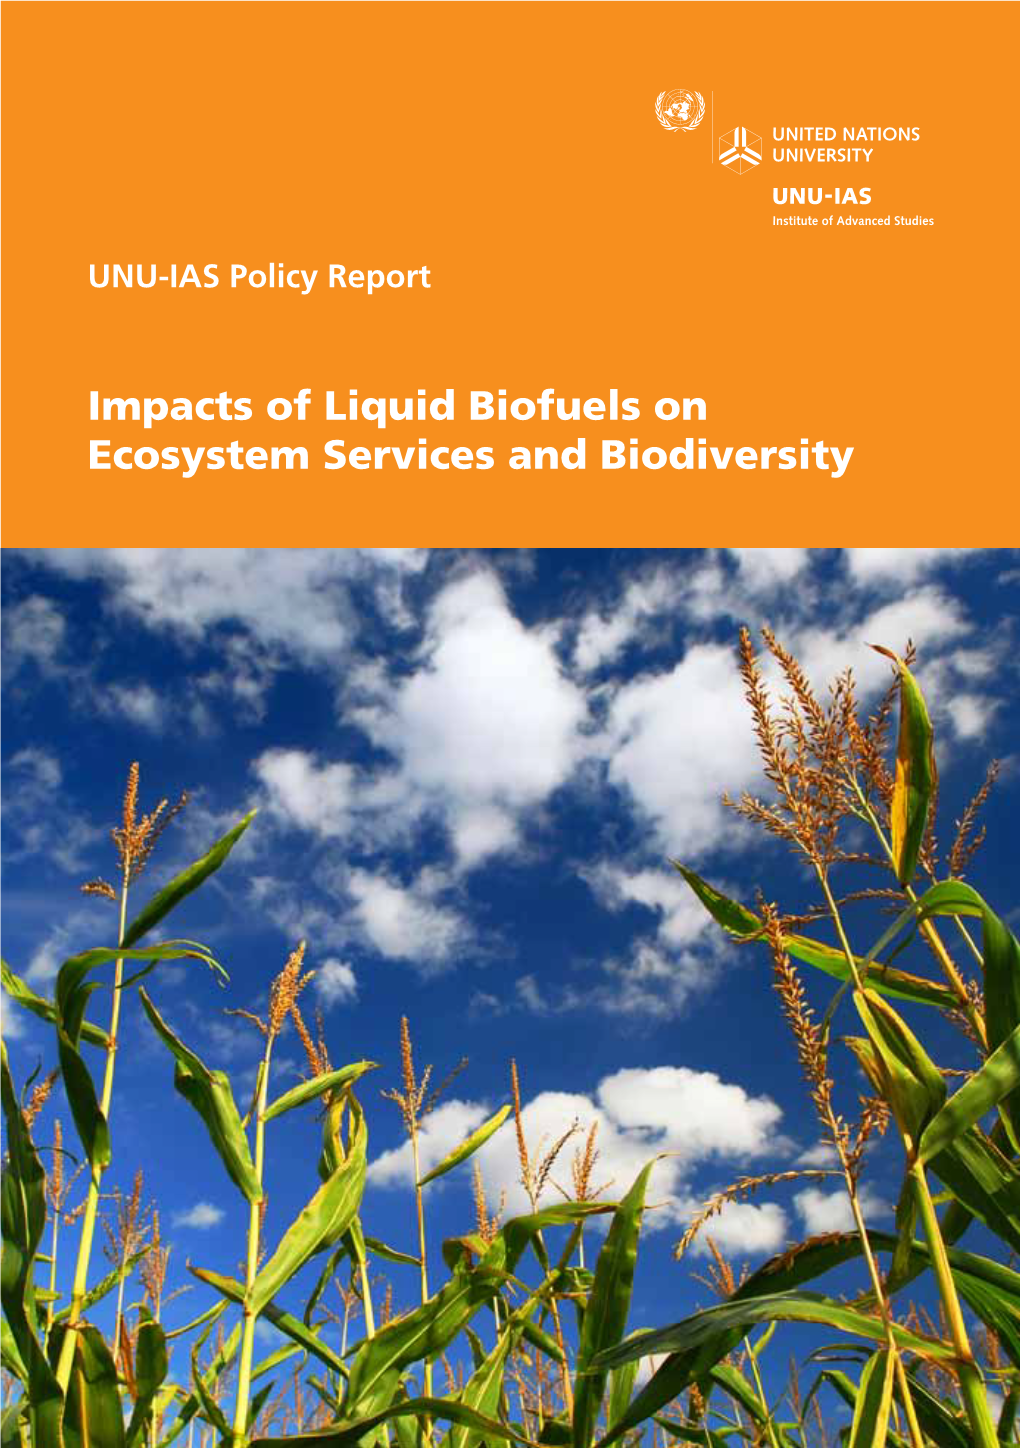 Impacts of Liquid Biofuels on Ecosystem Services and Biodiversity